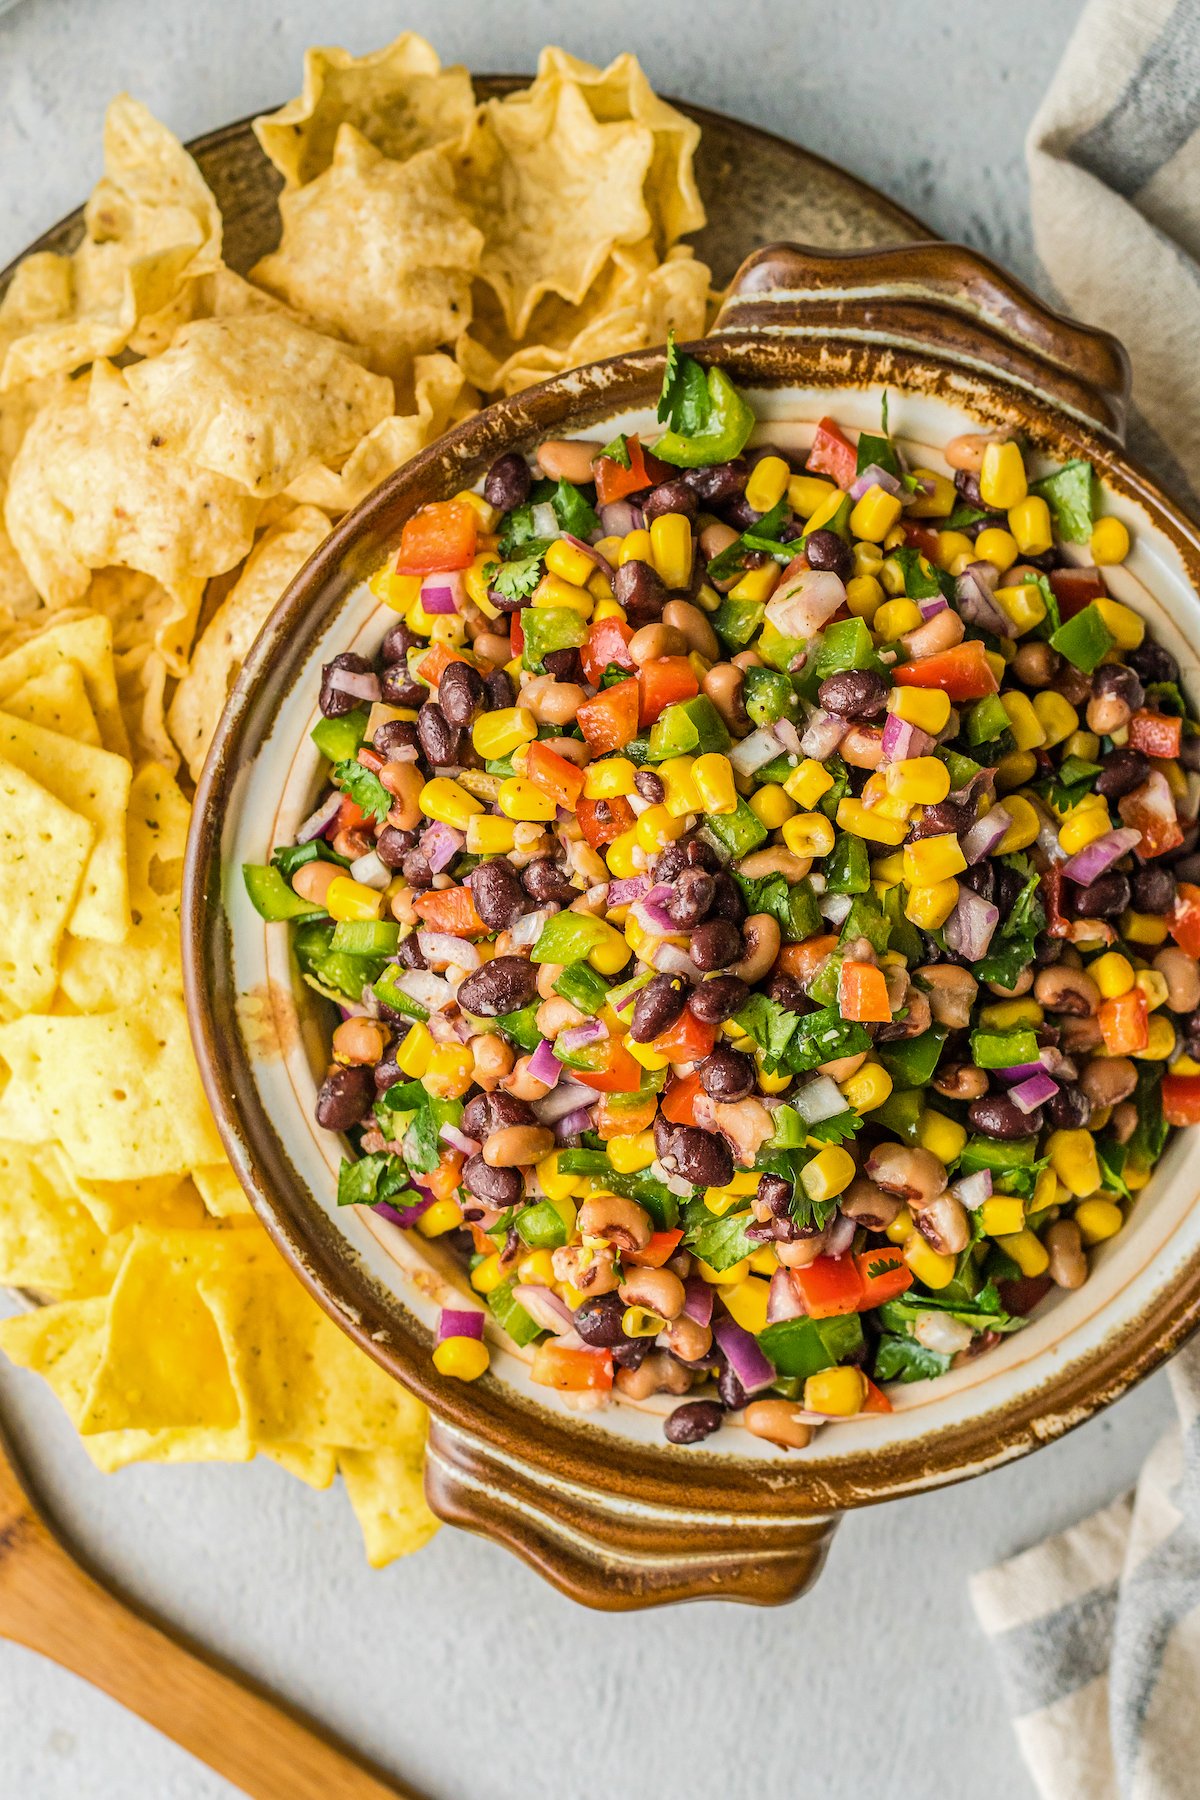 Corn, beans, and peppers, covered in dressing.